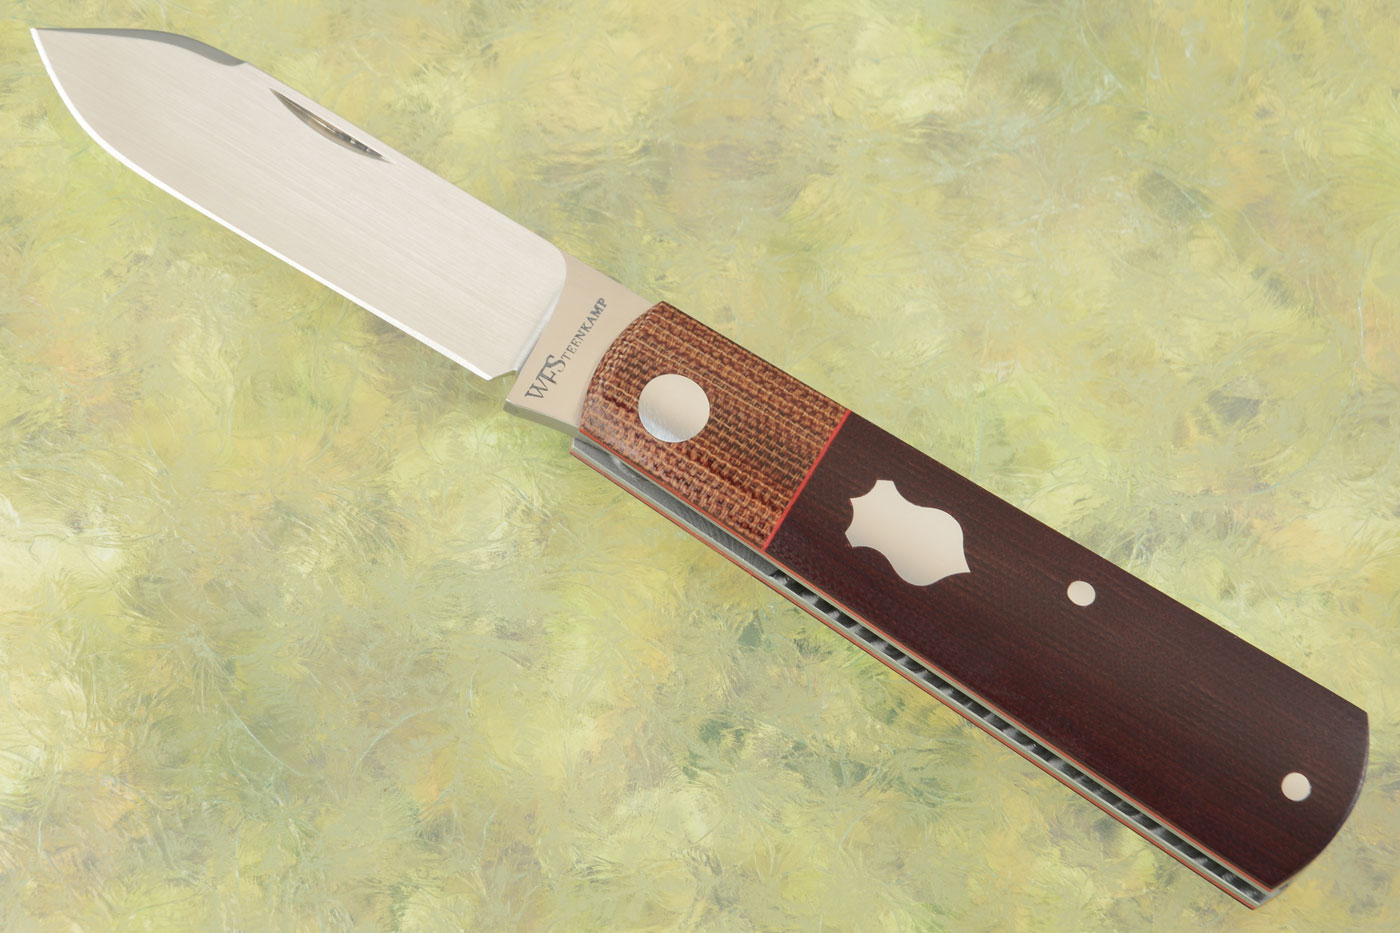 Barlow Slipjoint with Burgundy and Natural Micarta